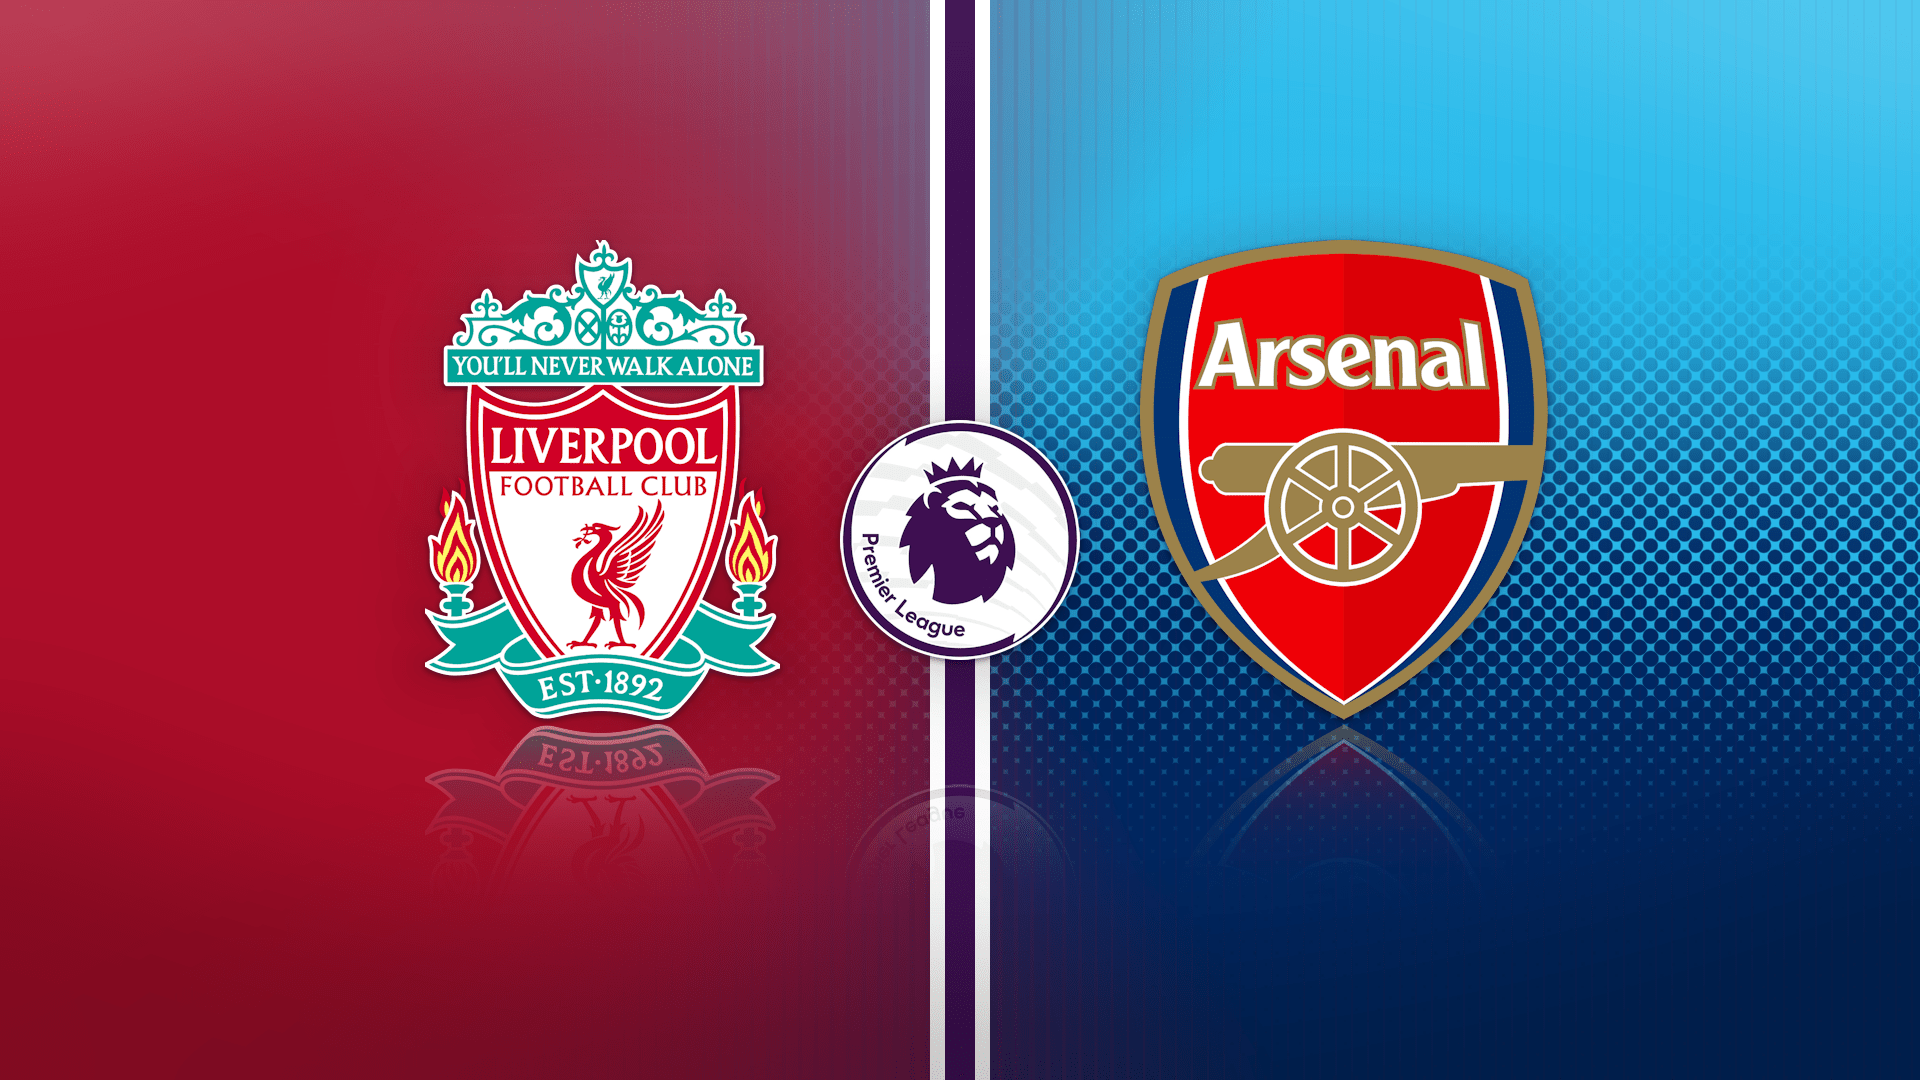 Premier League Liverpool And Arsenal - HD Wallpaper 